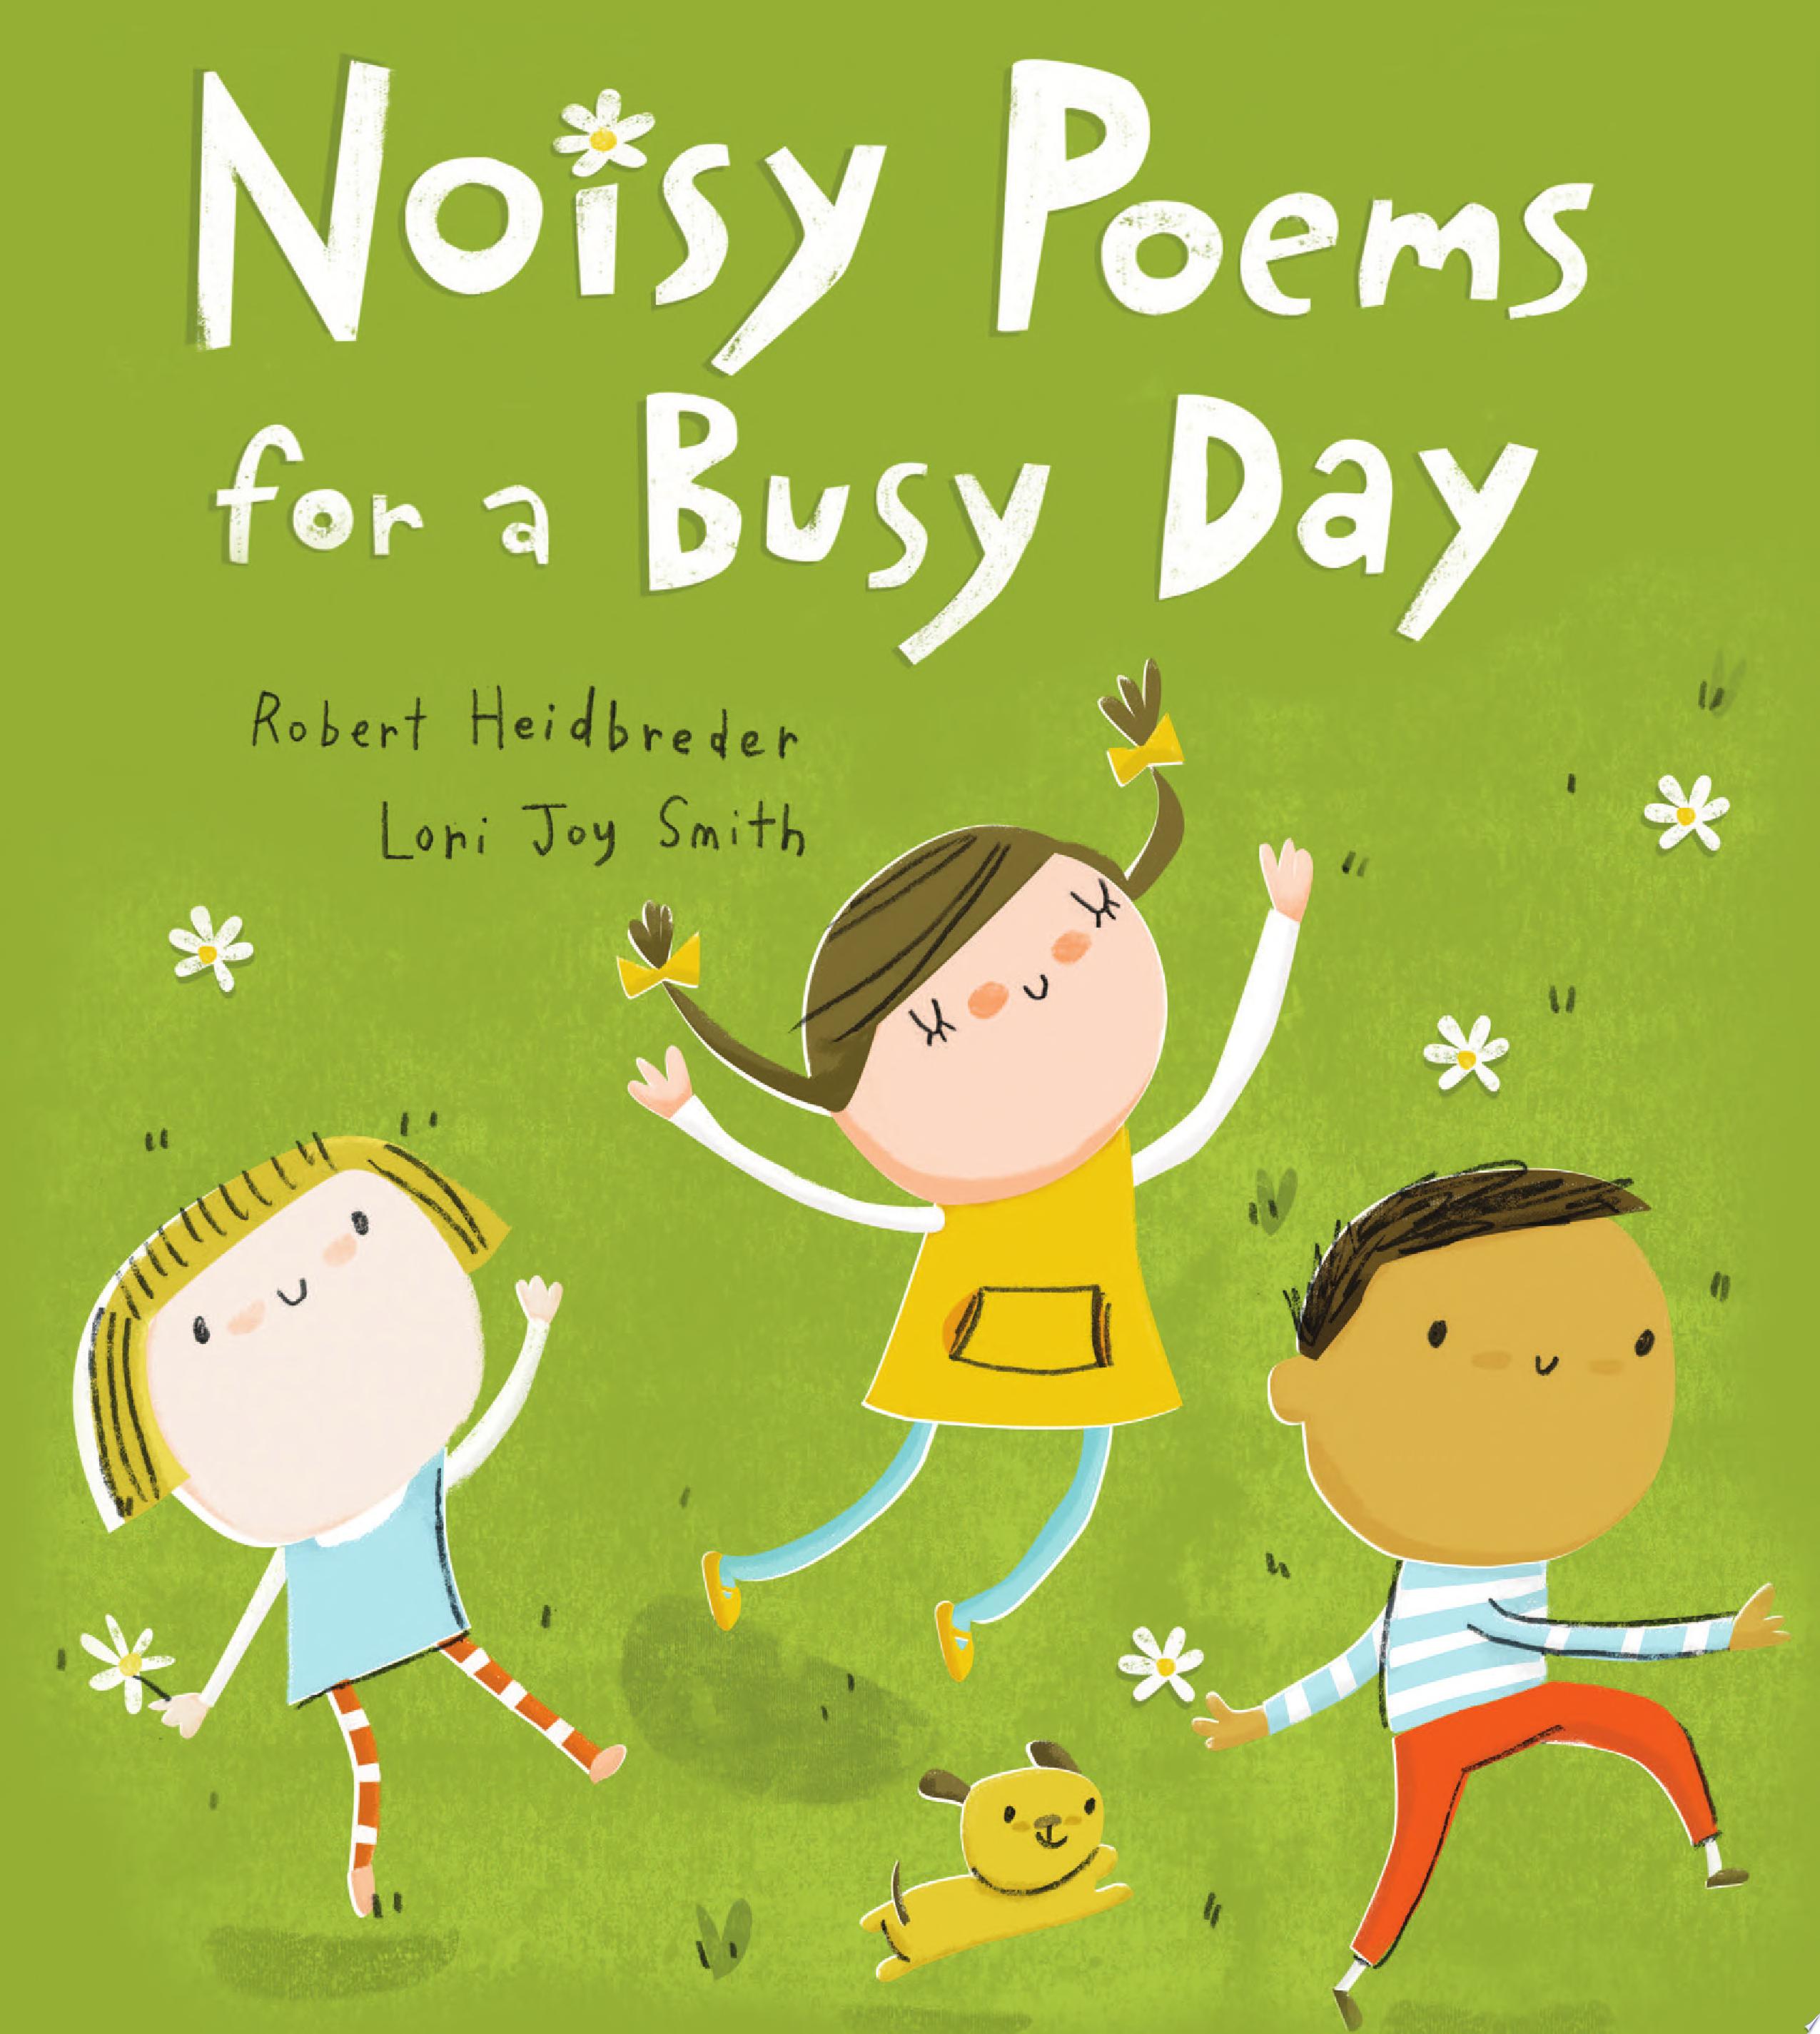 Image for "Noisy Poems for a Busy Day"